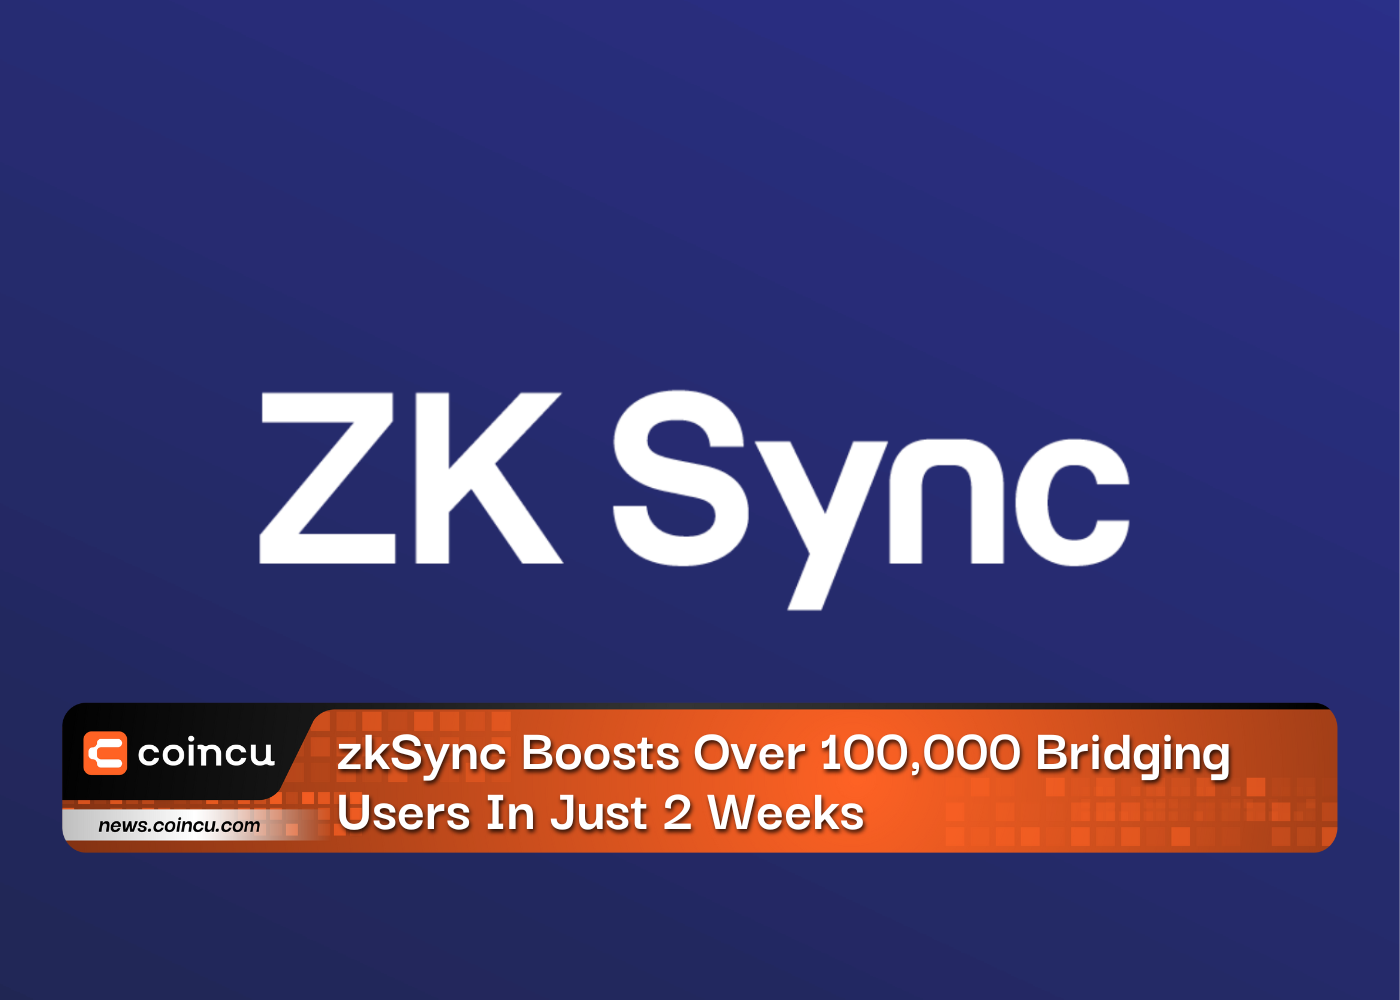 zkSync Boosts Over 100,000 Bridging Users In Just 2 Weeks